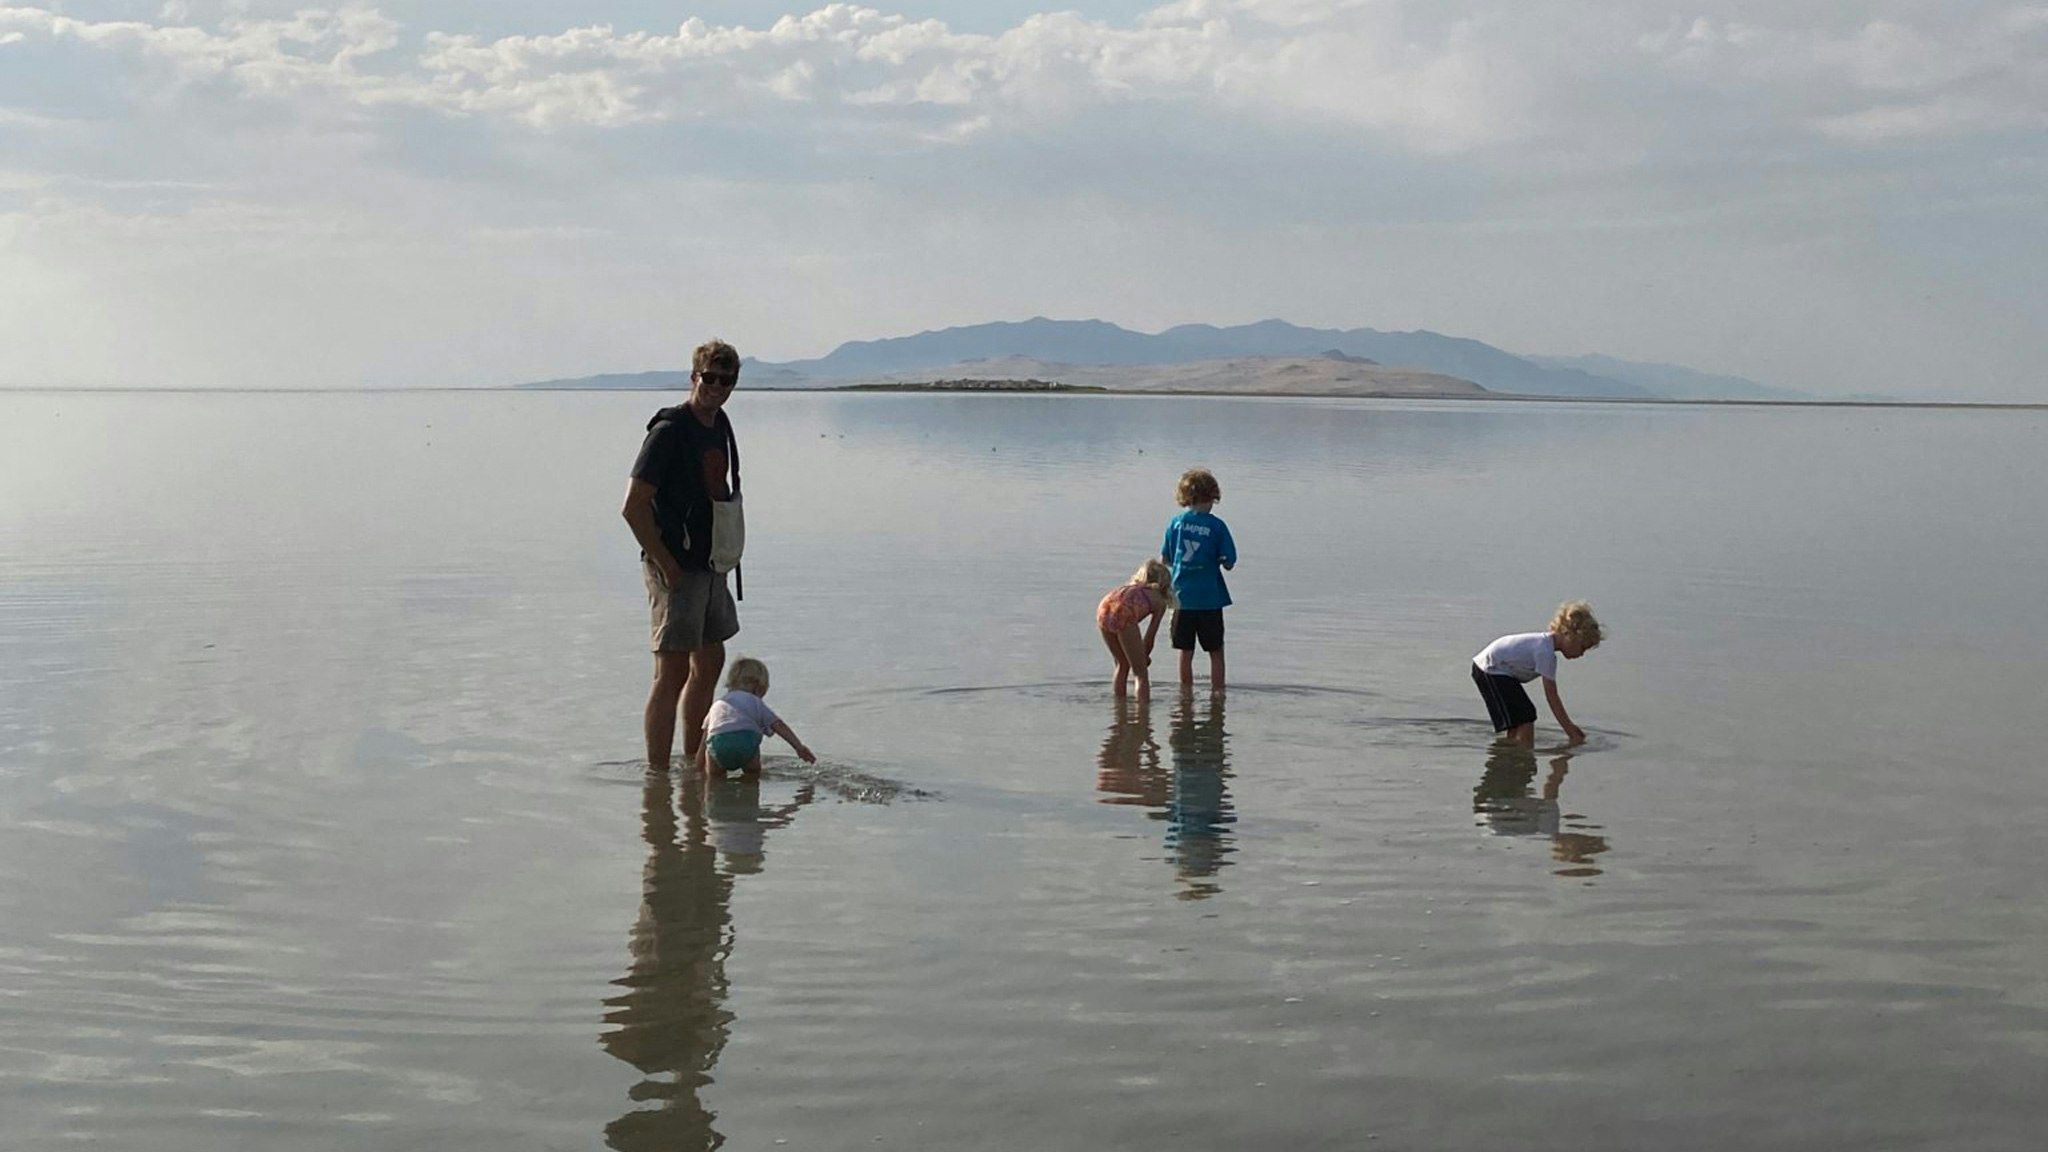 A family walking and playing in shallow water with a fog in the background.